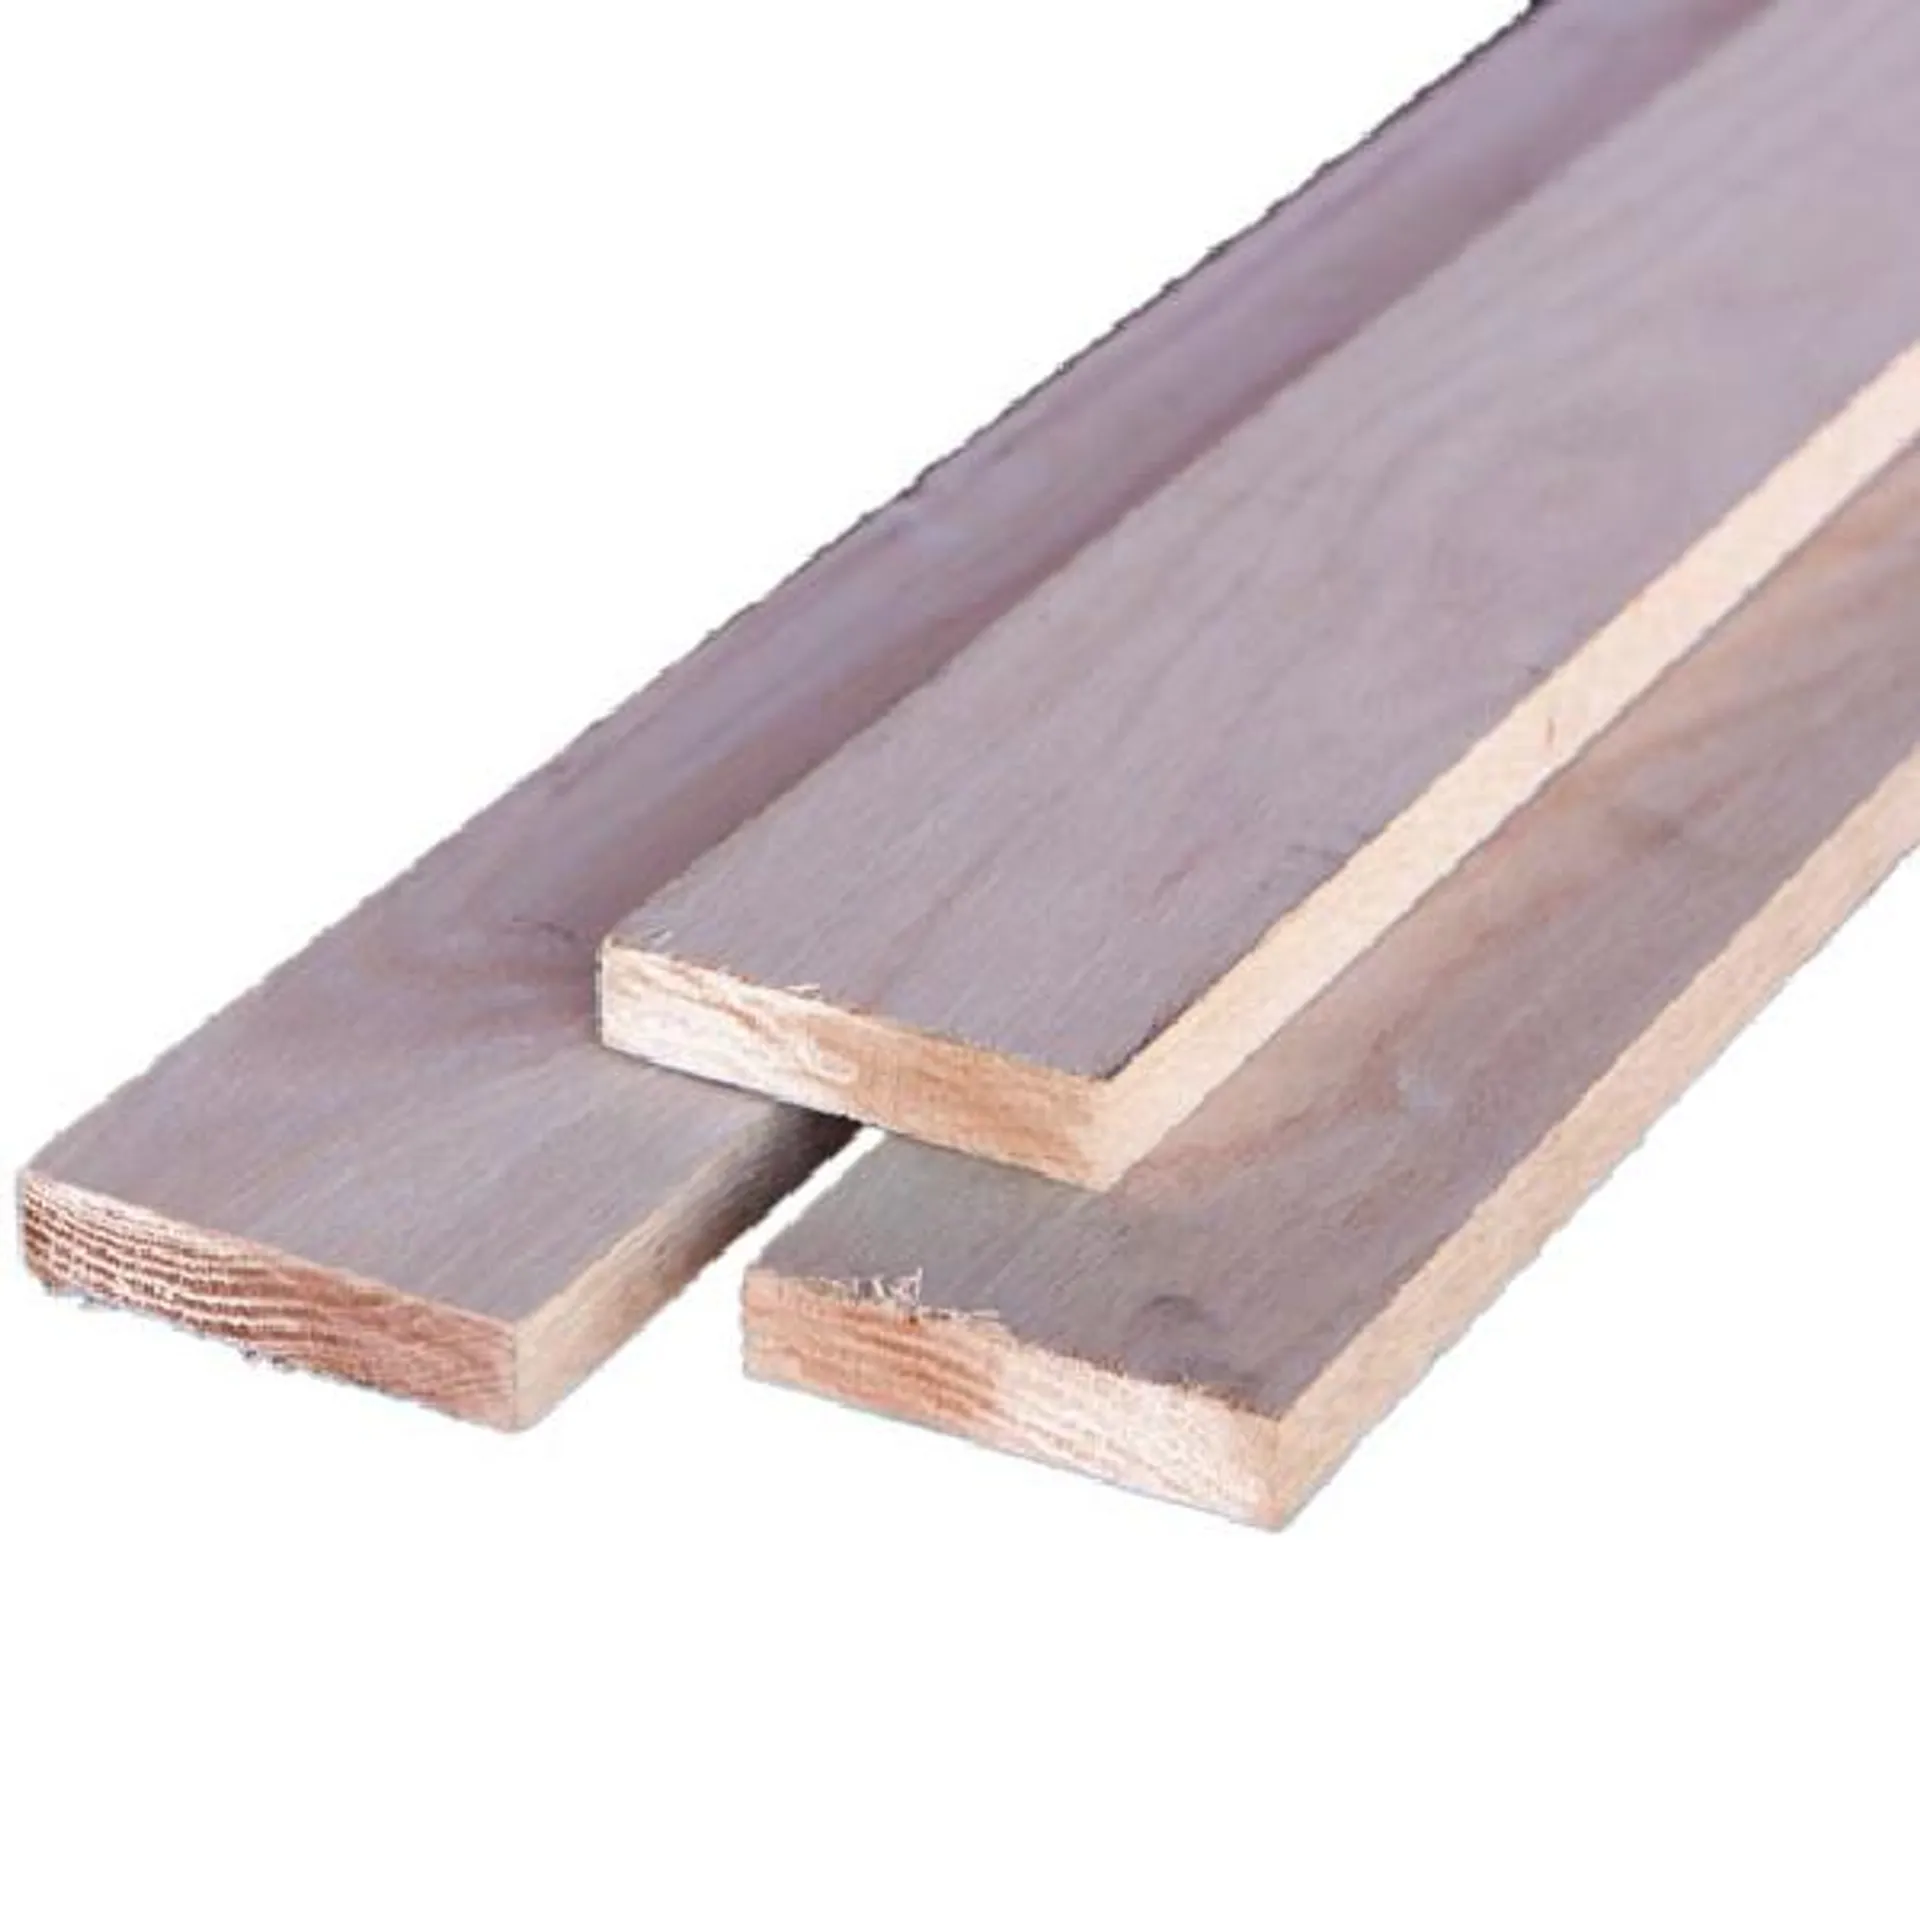 165890 Board, 6 ft L Nominal, 3 in W Nominal, 1 in Thick Nominal, Red Oak, Clear/Sand